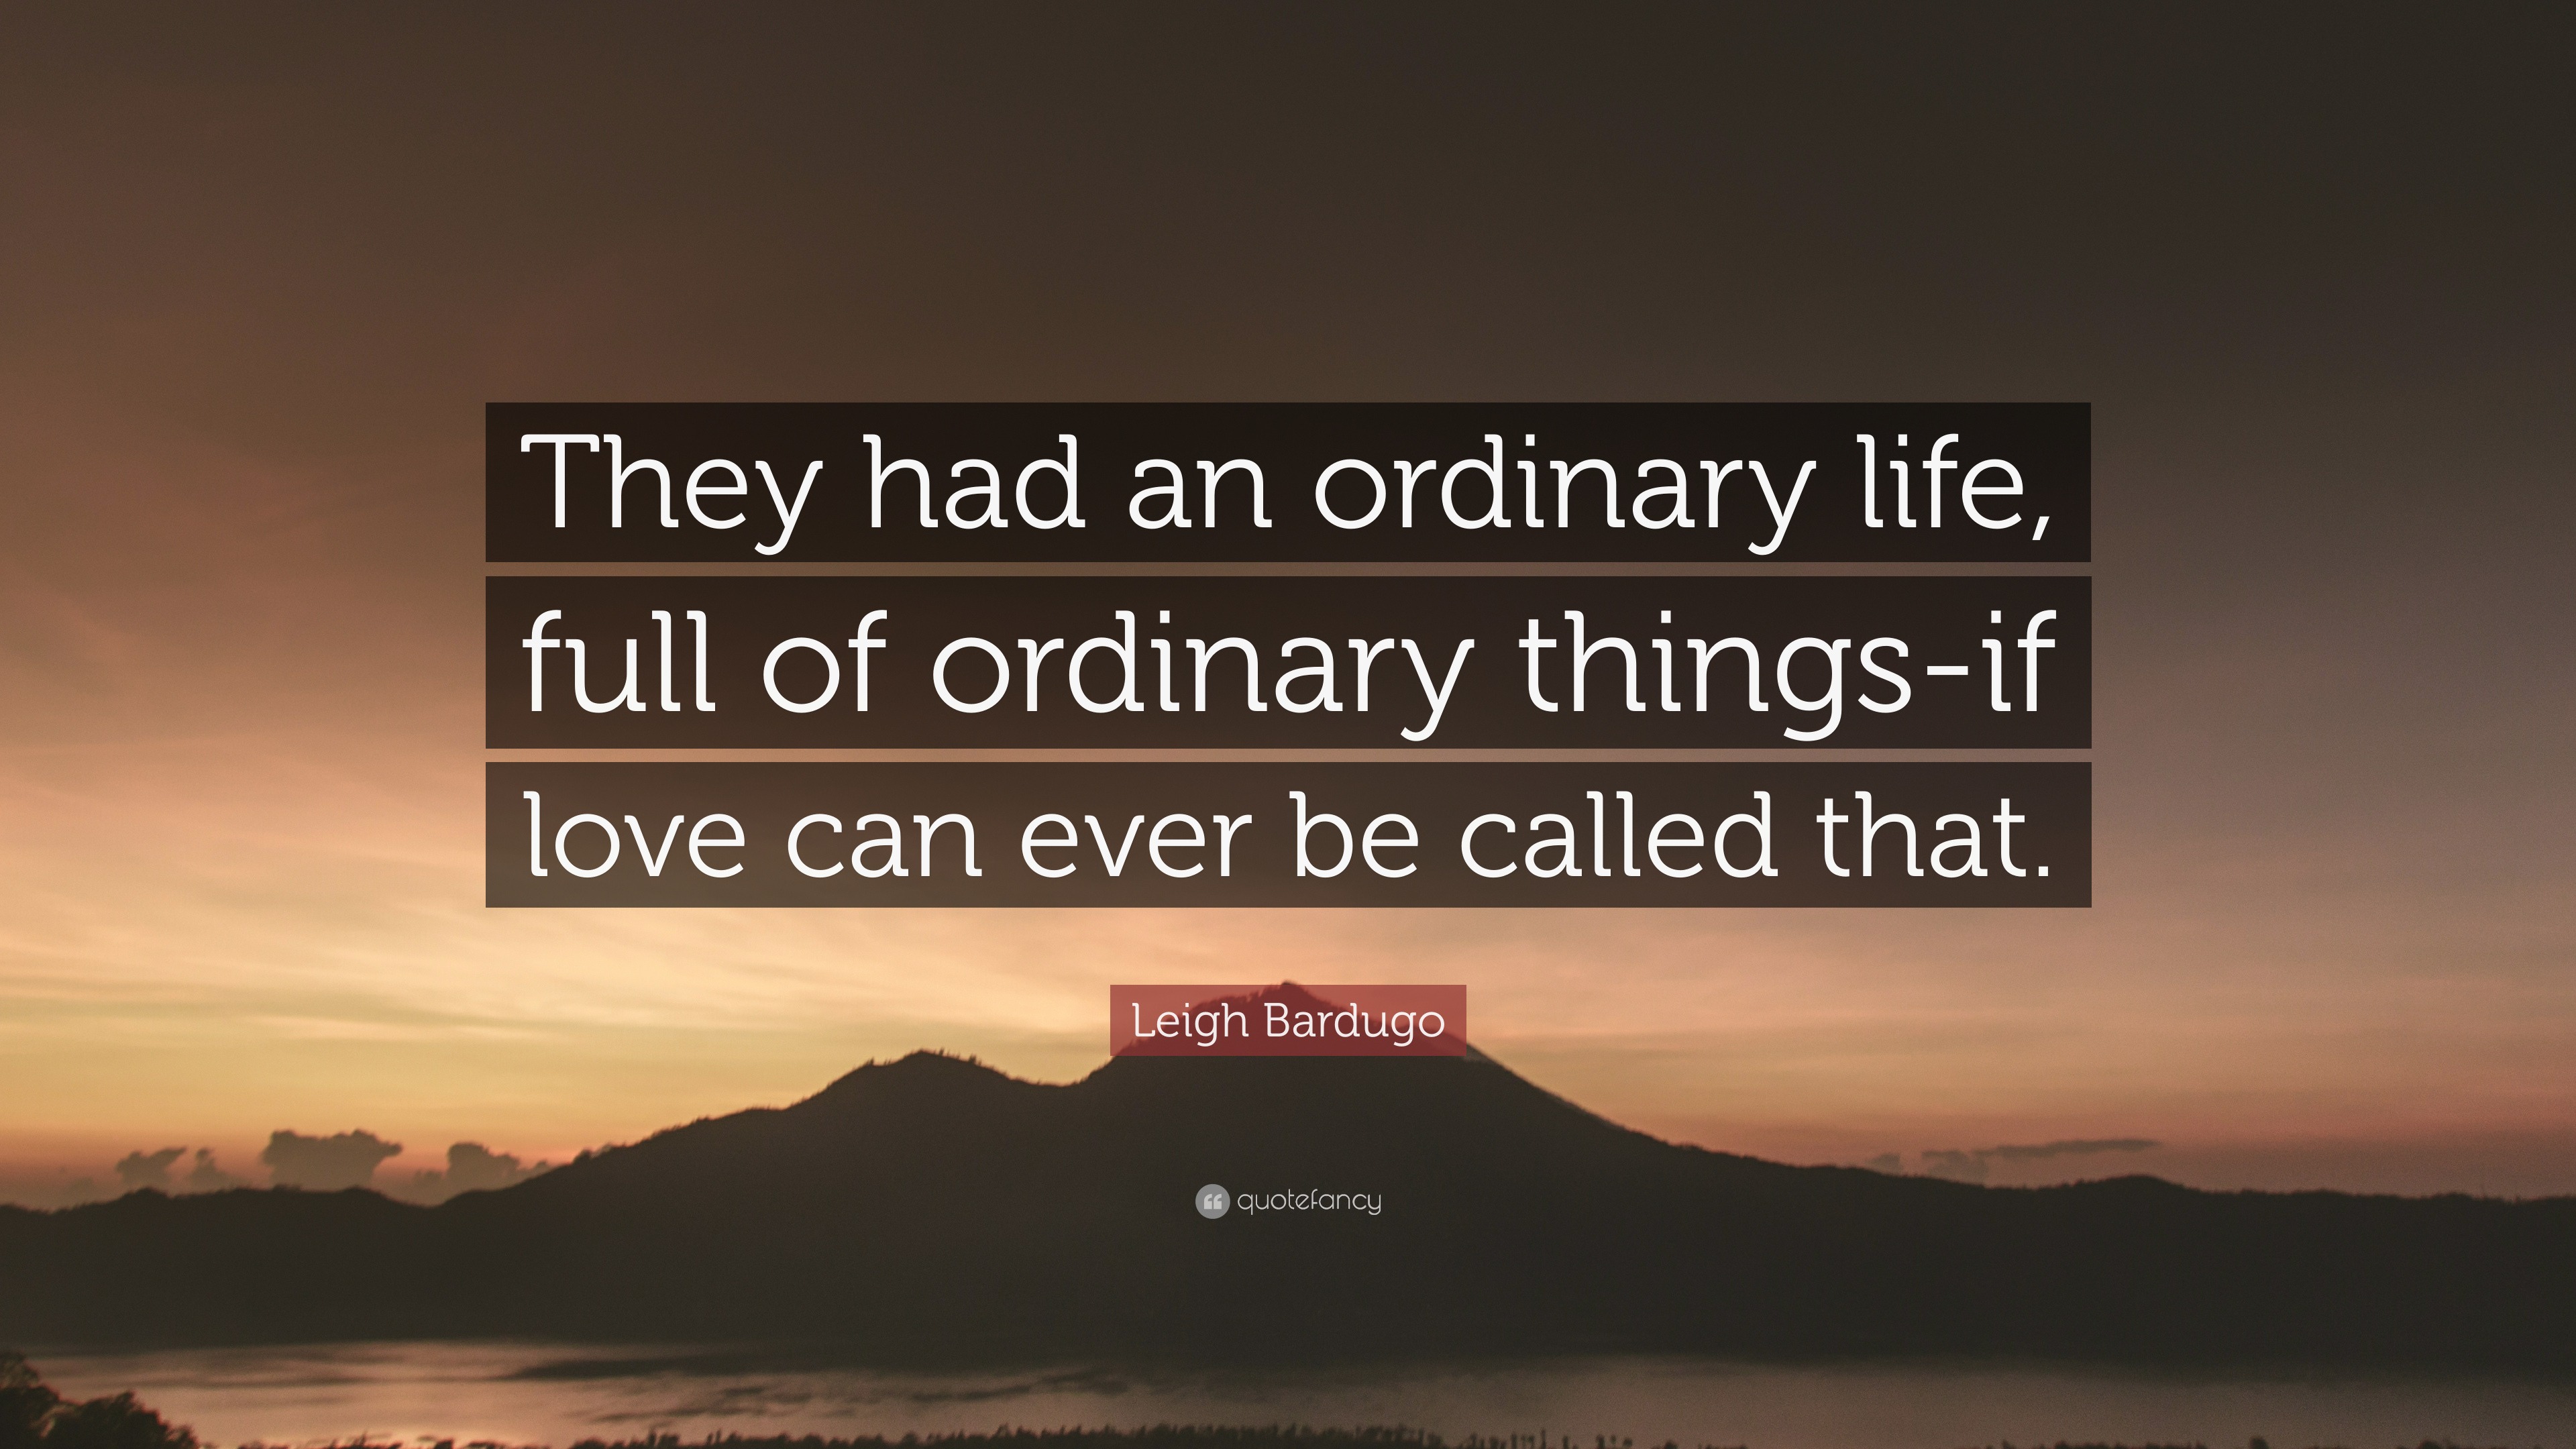 Leigh Bardugo Quote “They had an ordinary life full of ordinary things